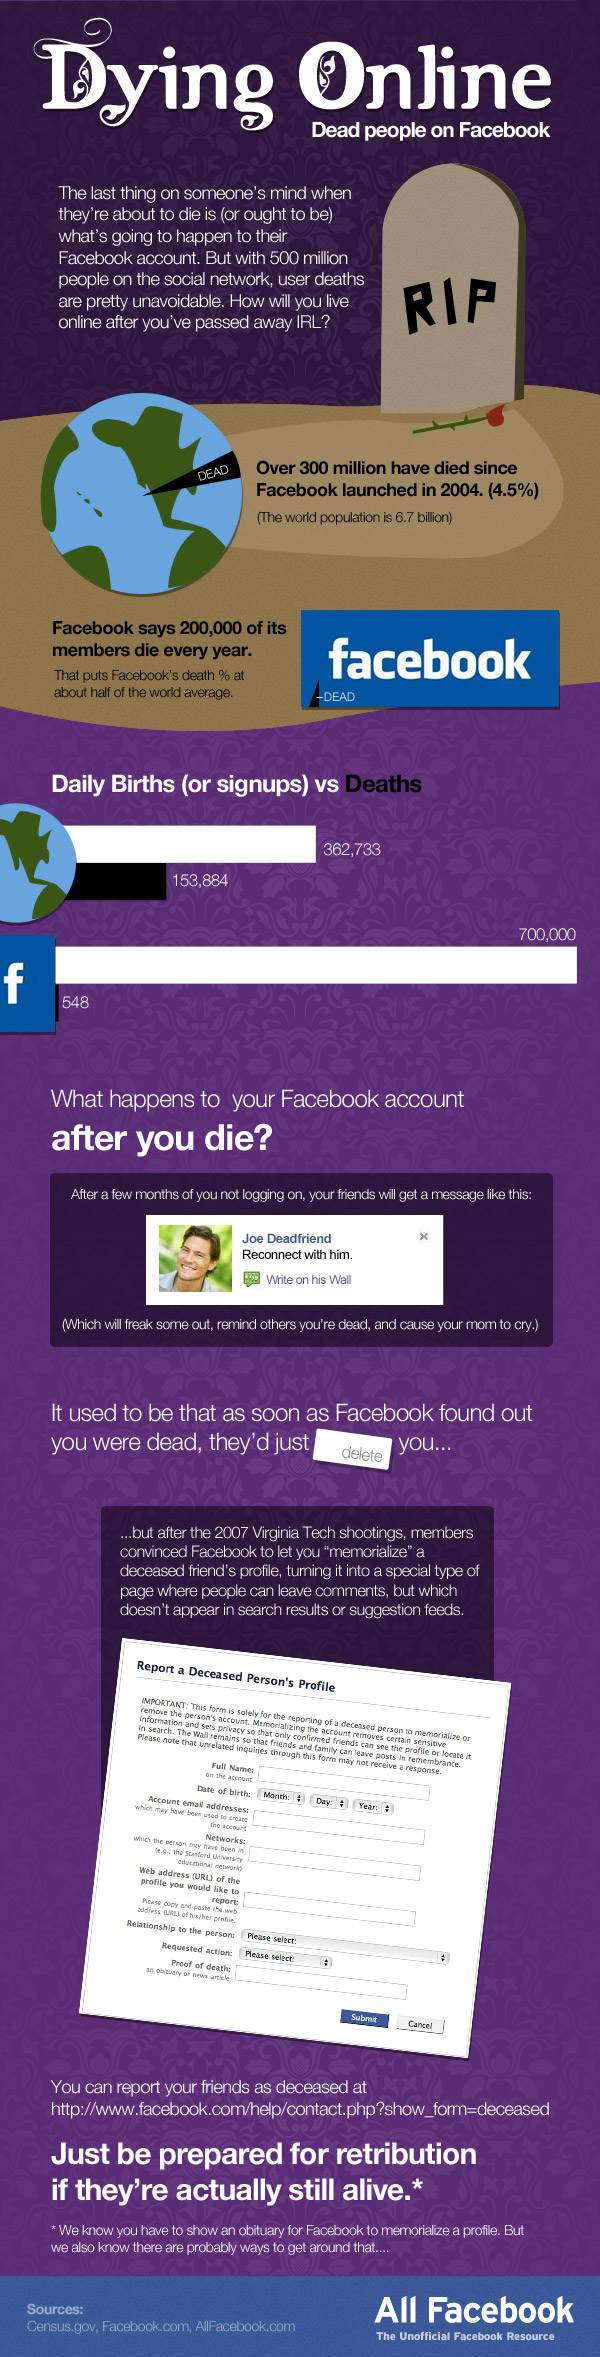 Surprising Facts About Death On Facebook [Infographic]